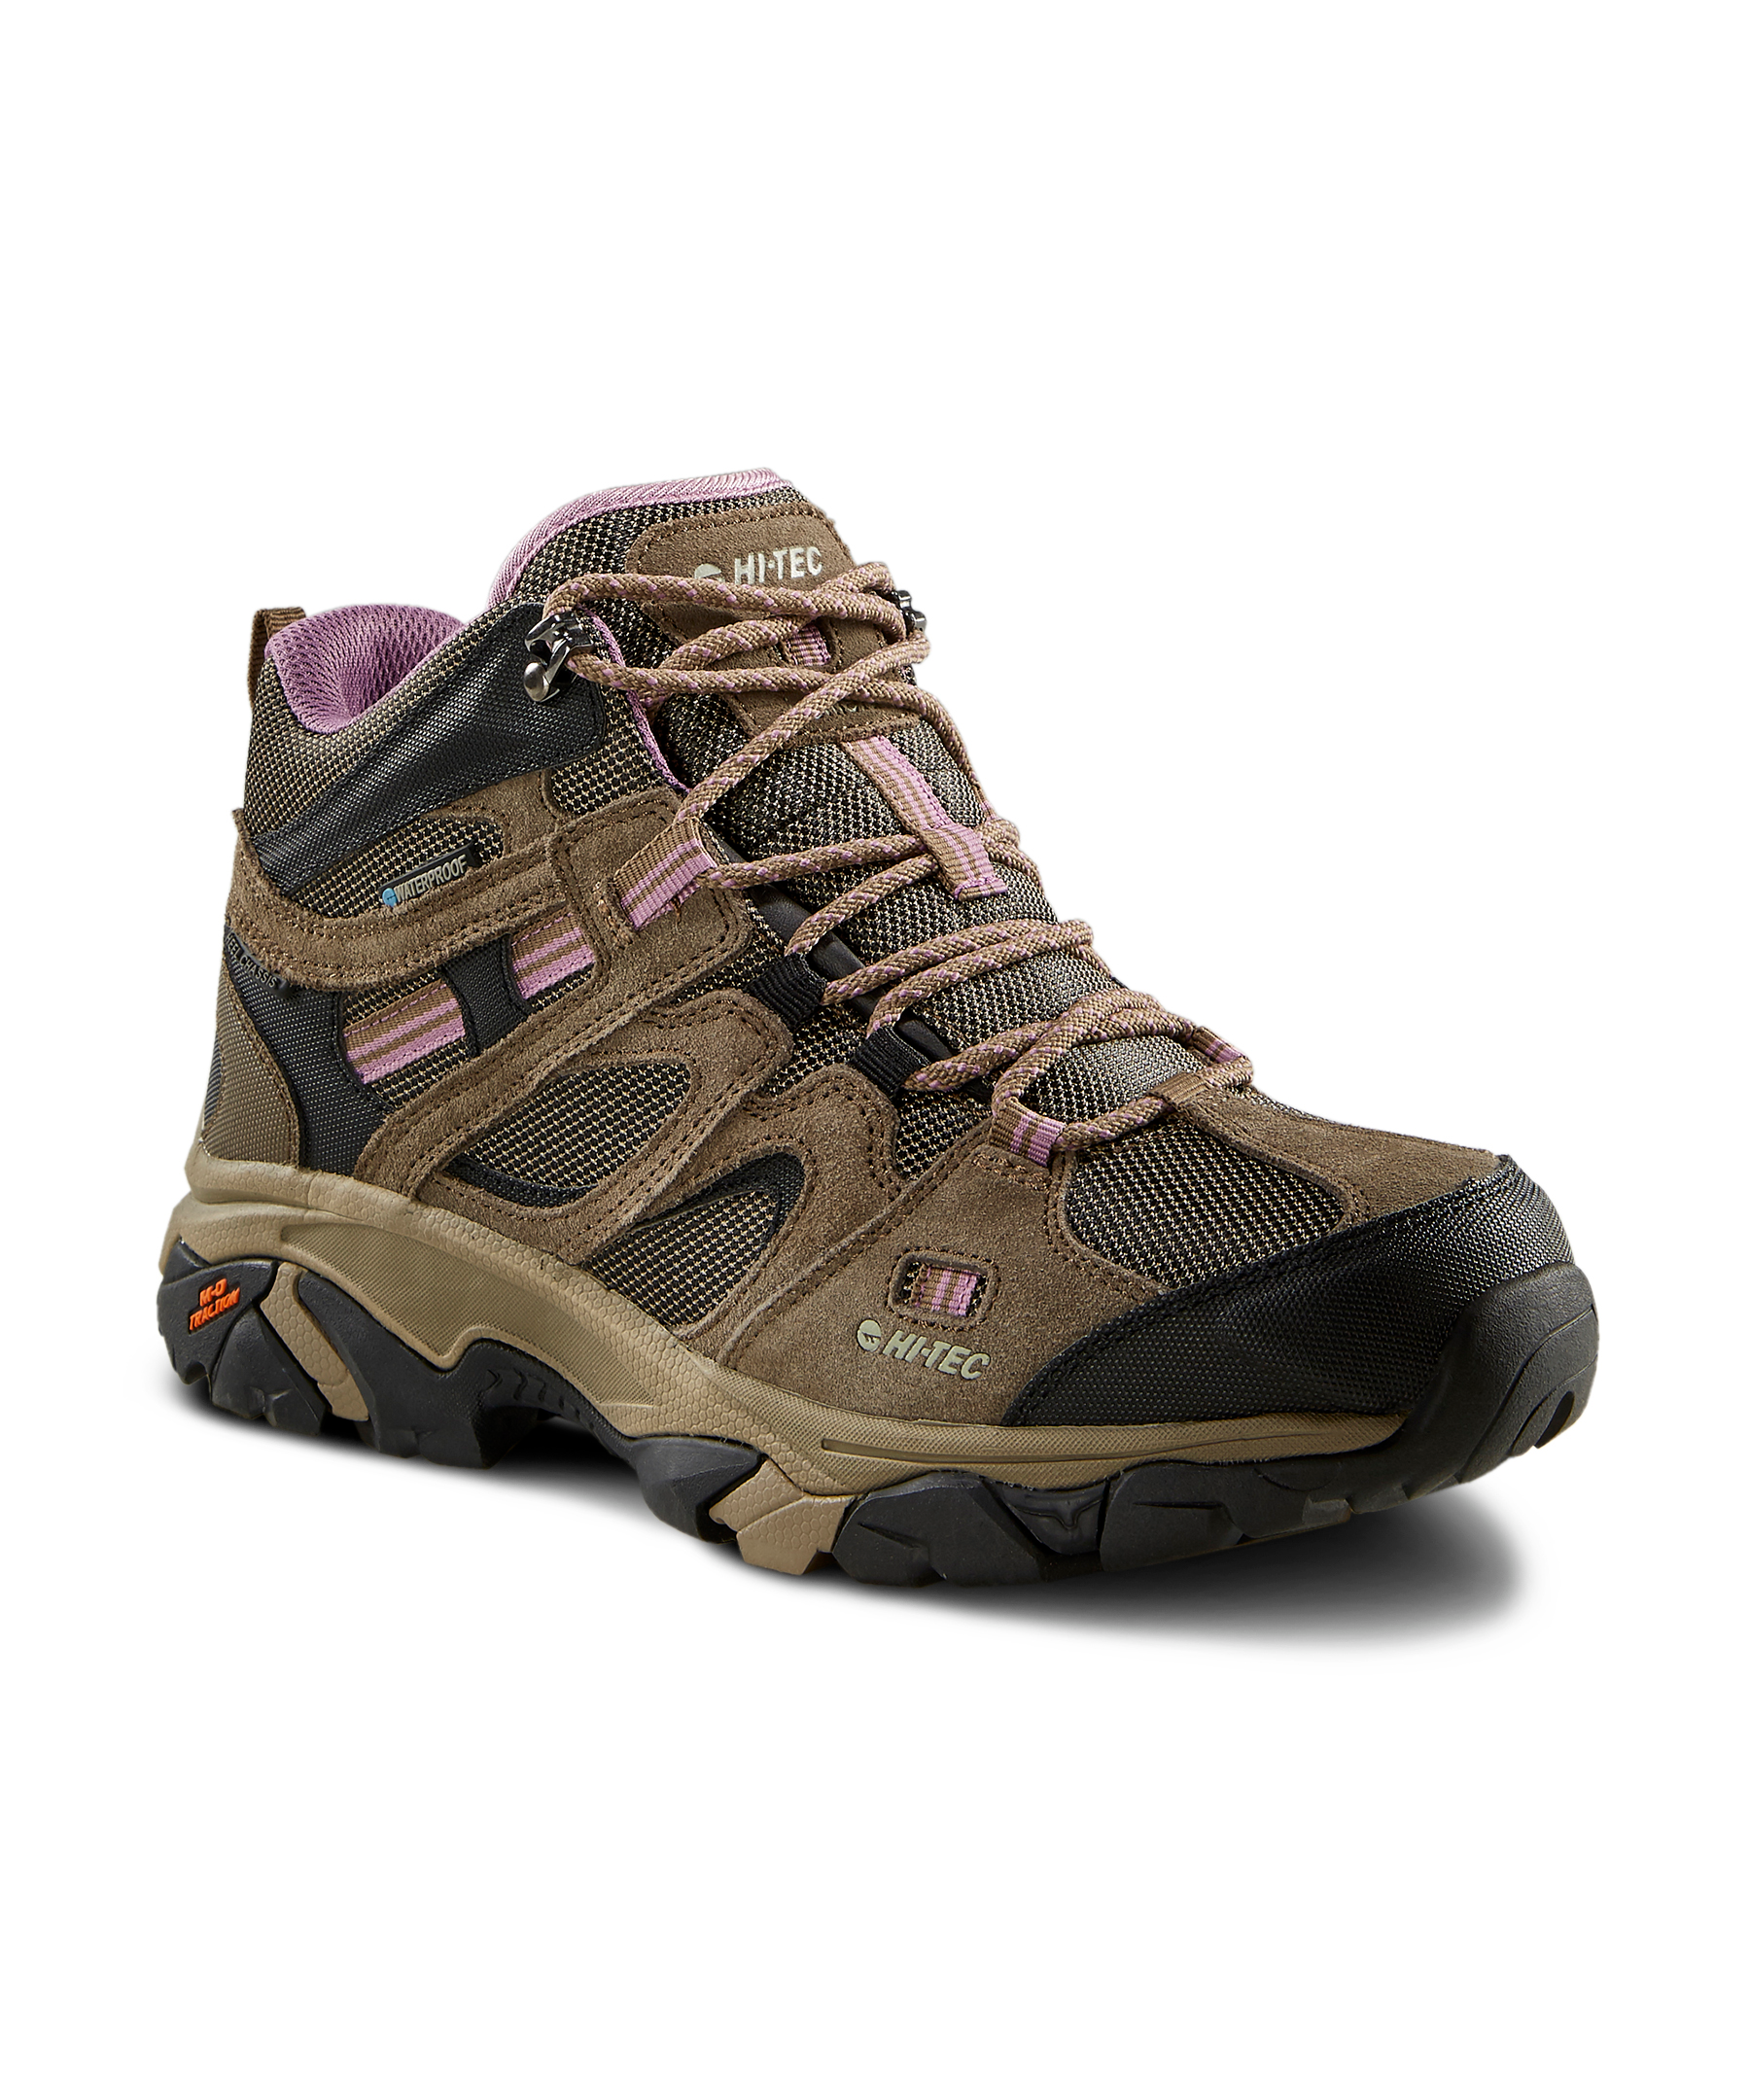 https://media-www.marks.com/product/marks-work-wearhouse/ladies-world/ladies-casual-footwear/410029511485/hi-tec-women-s-ravus-vent-breathable-waterproof-hiking-boots-taupe-fcd022cf-165c-470b-908c-b1e62c753010.png?imdensity=1&imwidth=640&impolicy=mZoom